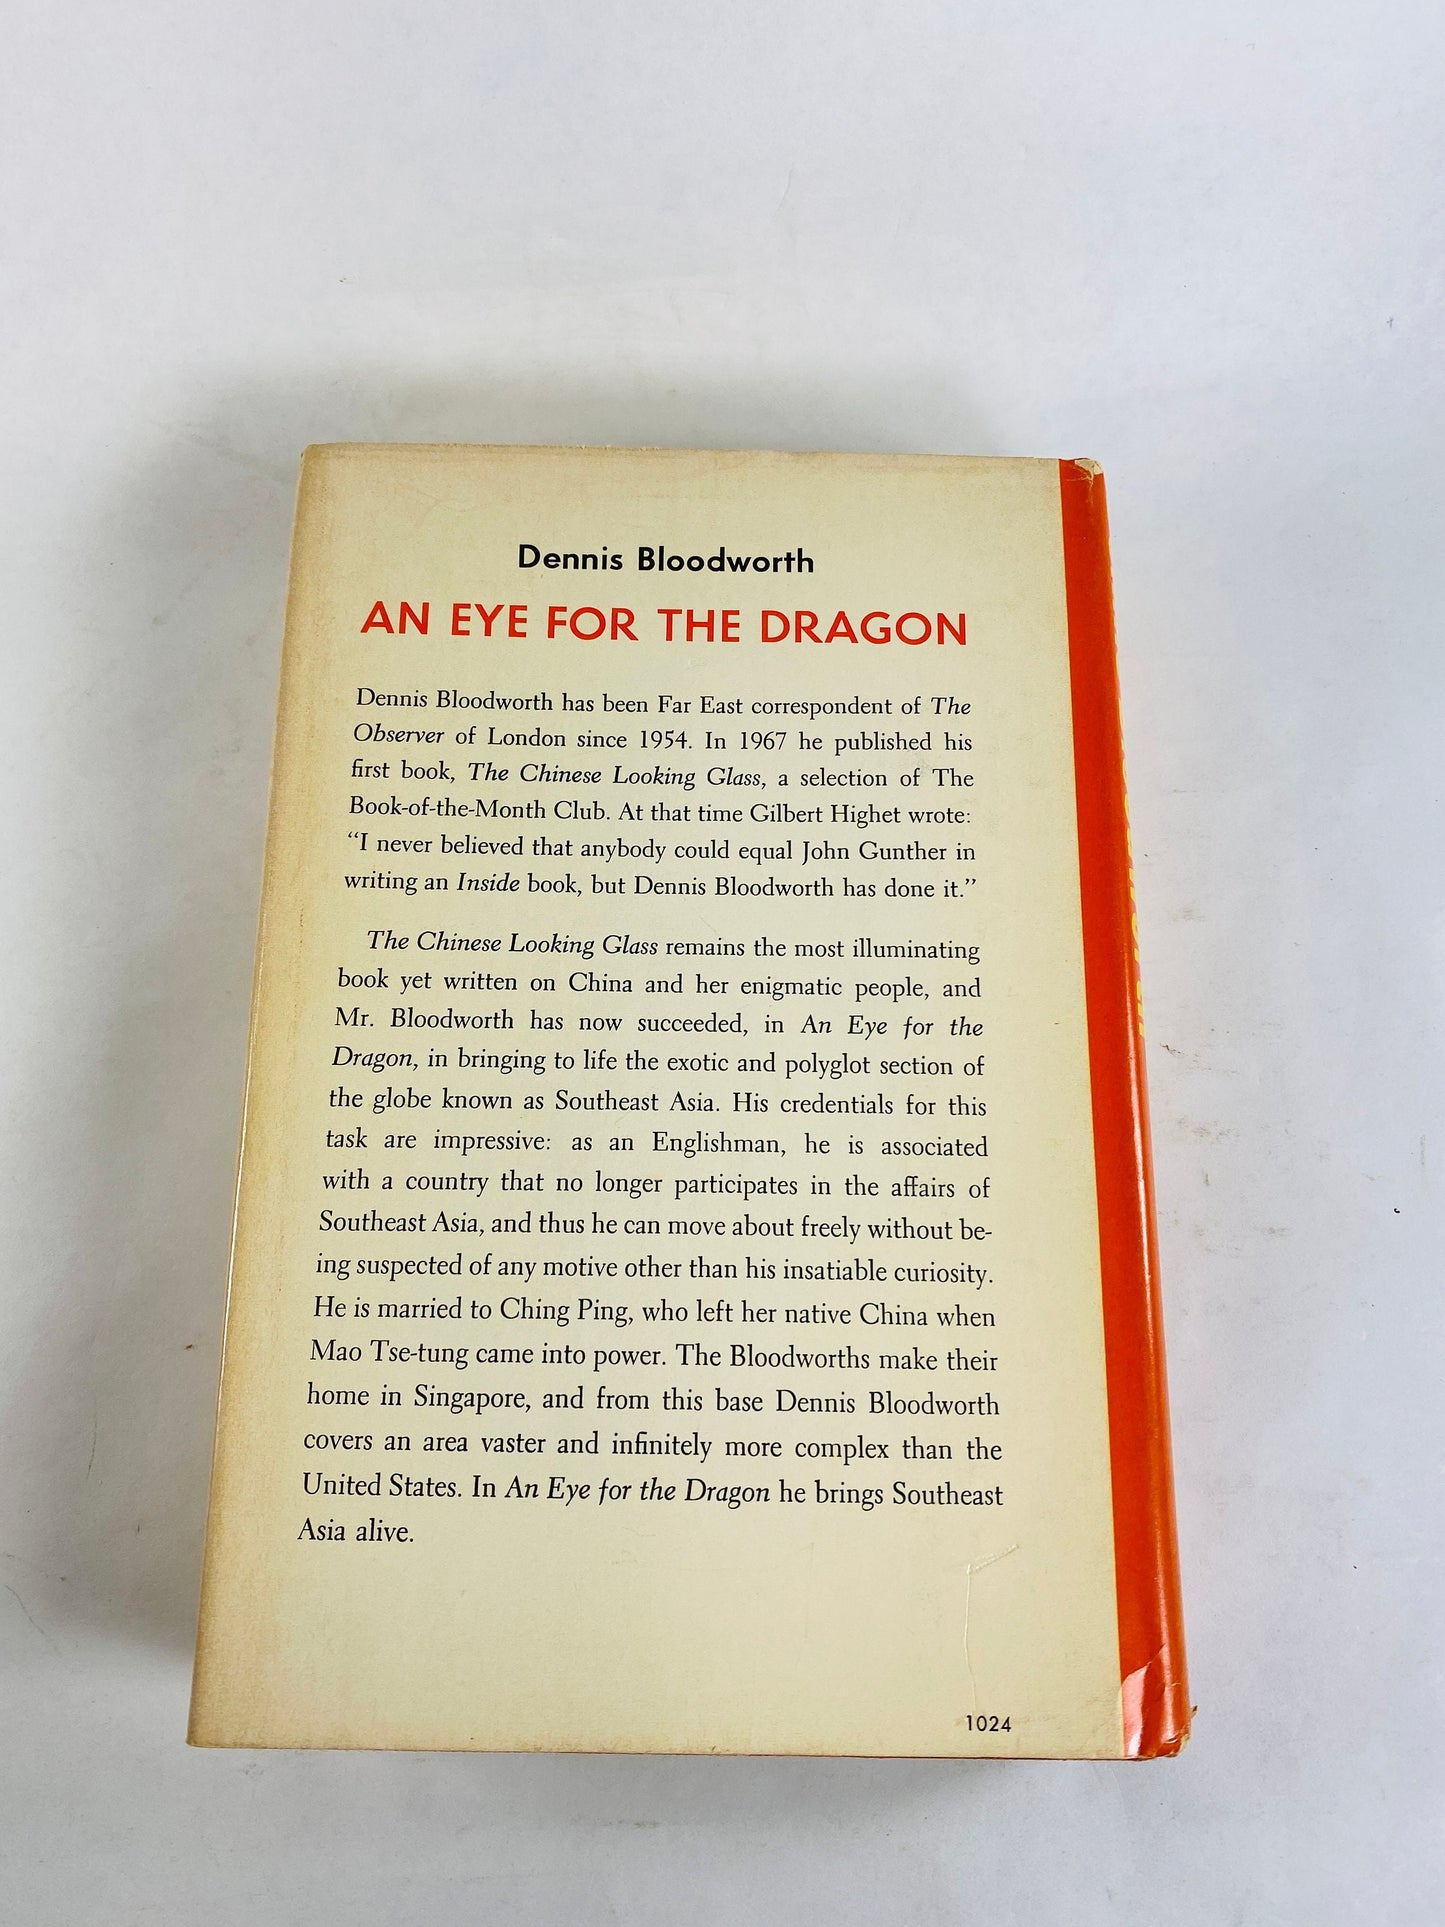 1970 An Eye for the Dragon sequel to Chinese Looking Glass FIRST EDITION vintage book by Dennis Bloodworth Book lover gift